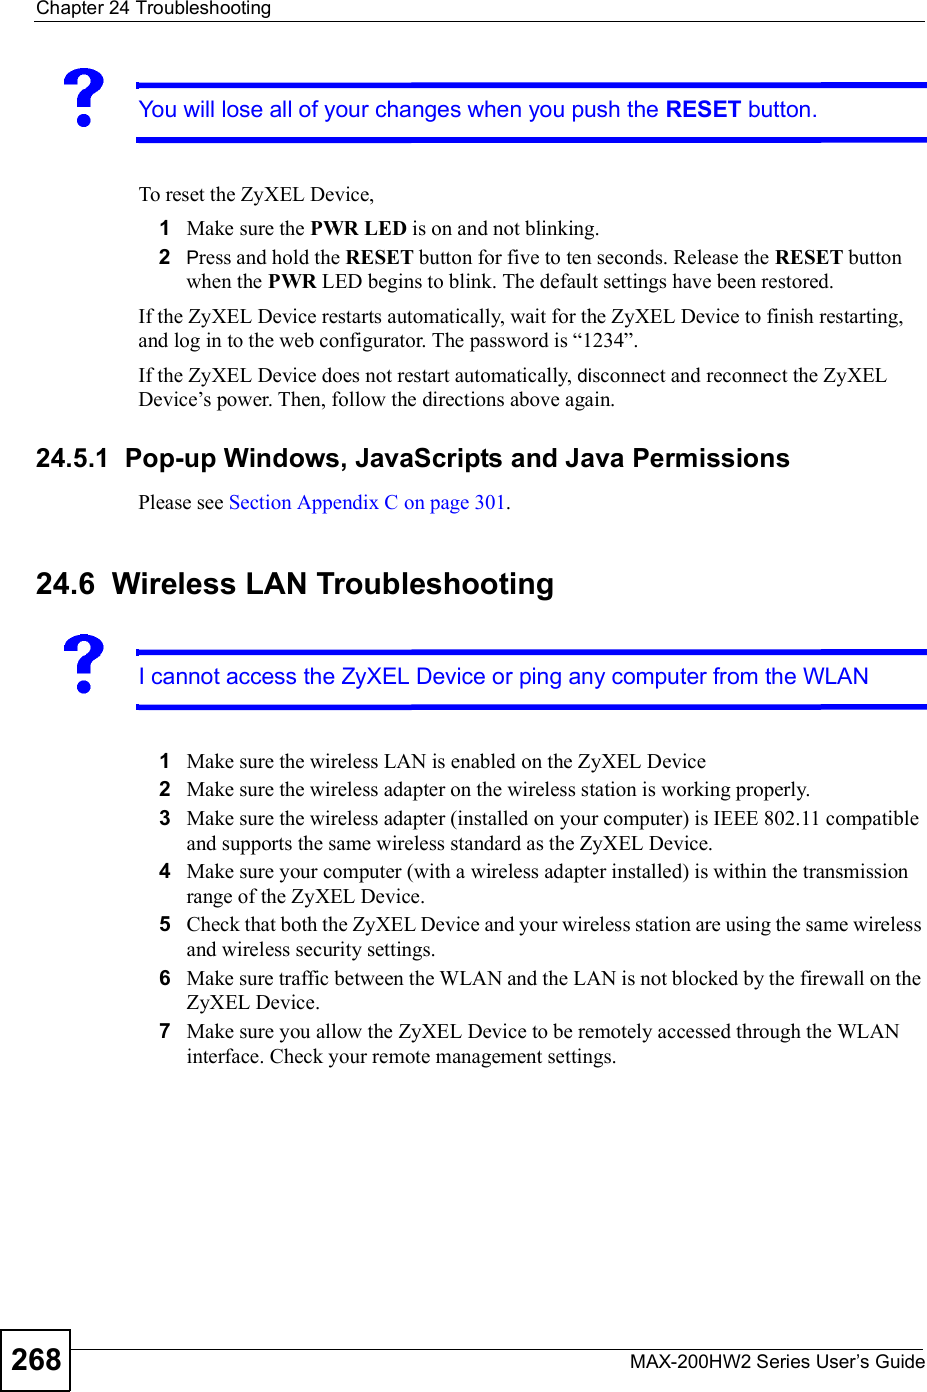 Chapter 24TroubleshootingMAX-200HW2 Series User s Guide268You will lose all of your changes when you push the RESET button.To reset the ZyXEL Device,1Make sure the PWR LED is on and not blinking.2Press and hold the RESET button for five to ten seconds. Release the RESET button when the PWR LED begins to blink. The default settings have been restored.If the ZyXEL Device restarts automatically, wait for the ZyXEL Device to finish restarting, and log in to the web configurator. The password is &quot;1234#.If the ZyXEL Device does not restart automatically, disconnect and reconnect the ZyXEL Device!s power. Then, follow the directions above again.24.5.1  Pop-up Windows, JavaScripts and Java PermissionsPlease see Section Appendix C on page 301.24.6  Wireless LAN TroubleshootingI cannot access the ZyXEL Device orping any computer from the WLAN1Make sure the wireless LAN is enabled on the ZyXEL Device2Make sure the wireless adapter on the wireless station is working properly.3Make sure the wireless adapter (installed on your computer) is IEEE 802.11 compatible and supports the same wireless standard as the ZyXEL Device.4Make sure your computer (with a wireless adapter installed) is within the transmission range of the ZyXEL Device.5Check that both the ZyXEL Device and your wireless station are using the same wireless and wireless security settings.6Make sure traffic between the WLAN and the LAN is not blocked by the firewall on the ZyXEL Device.7Make sure you allow the ZyXEL Device to be remotely accessed through the WLAN interface. Check your remote management settings.